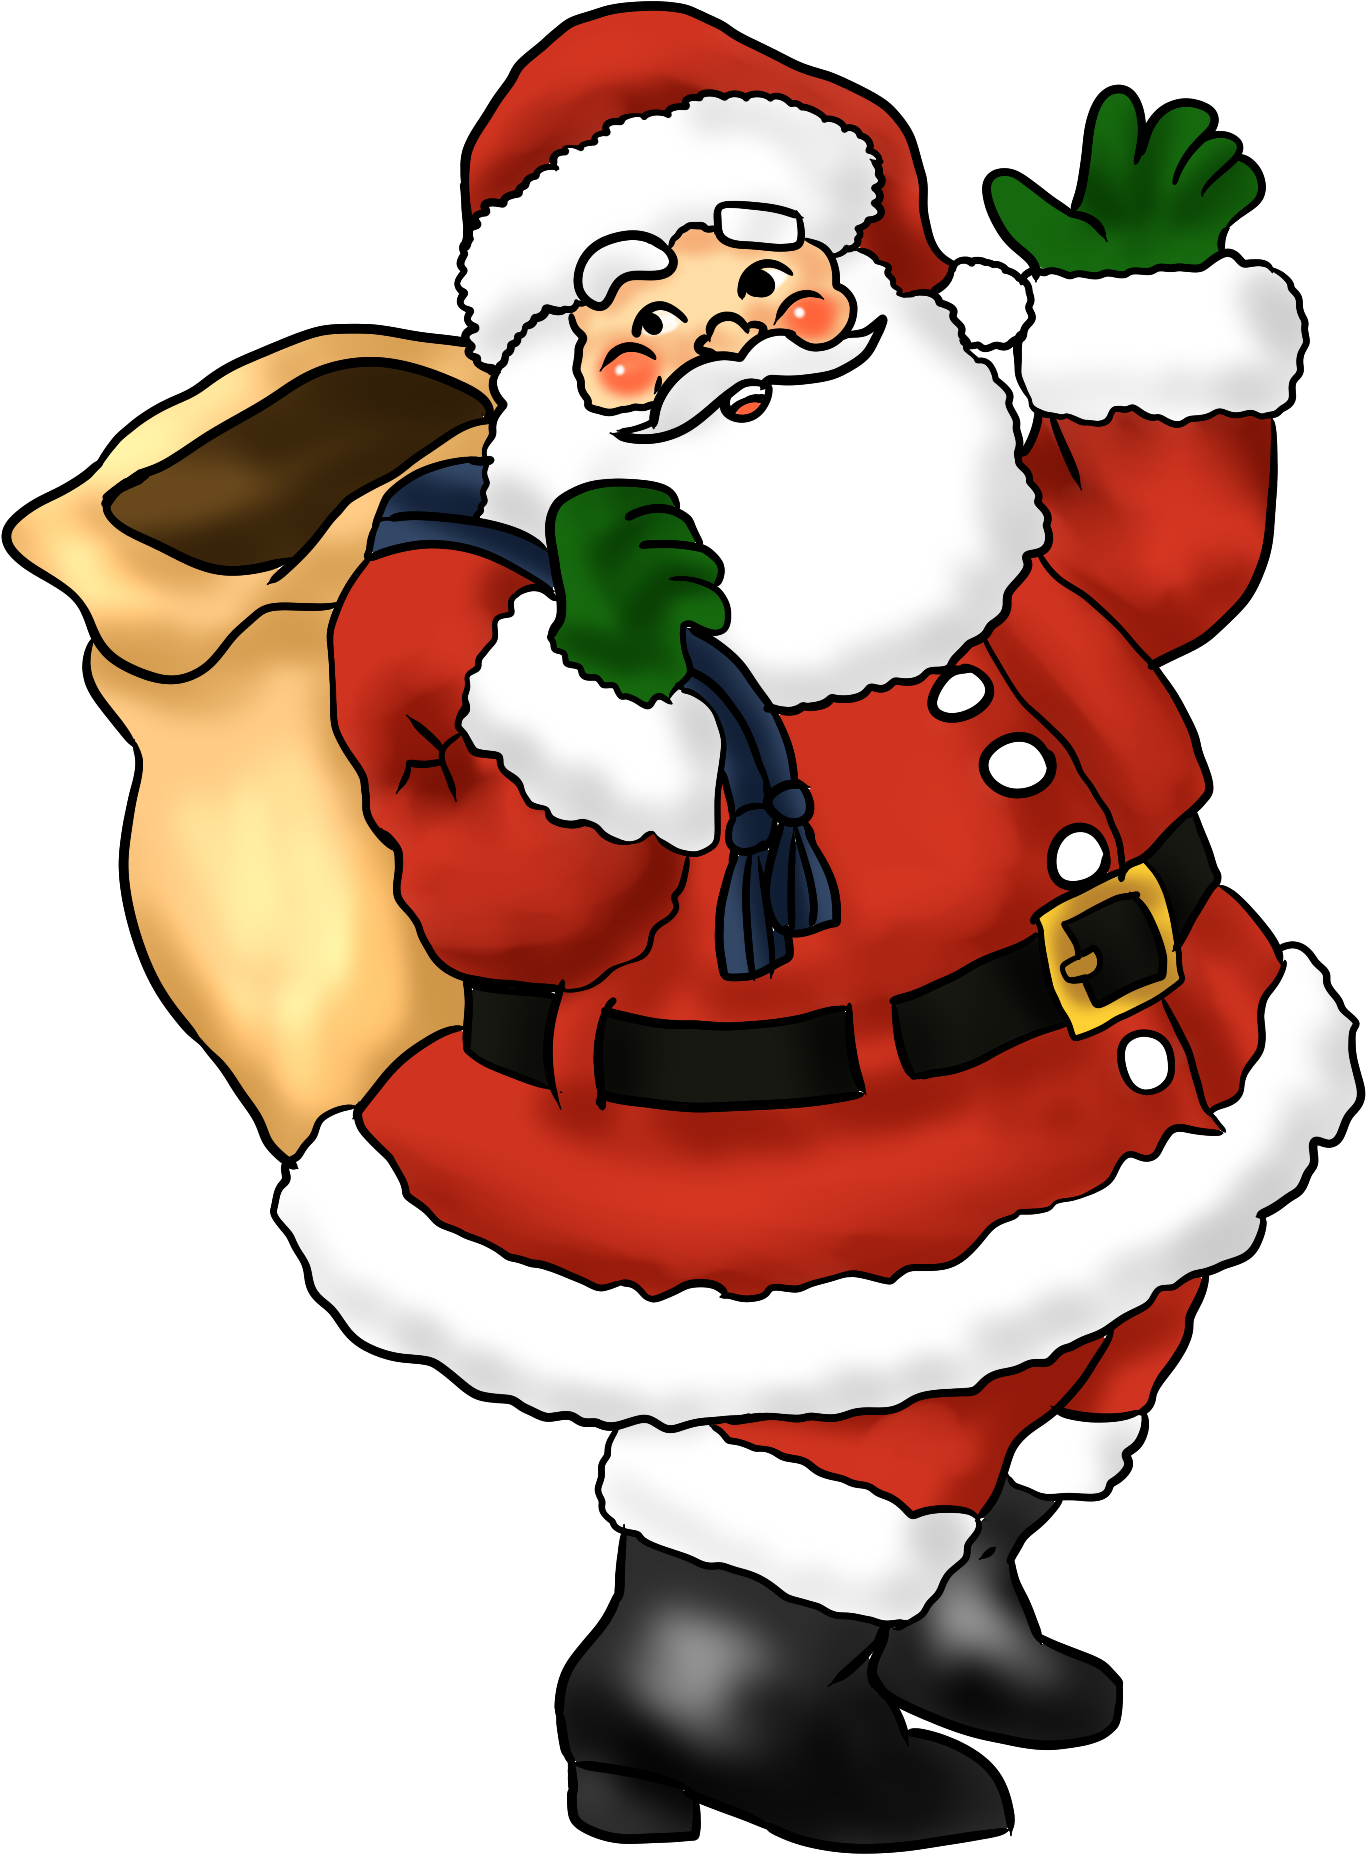 Free Lovely Santa Claus Clip Art - Whimsical Christmas Easy Coloring Book For Adults (2000x2000)